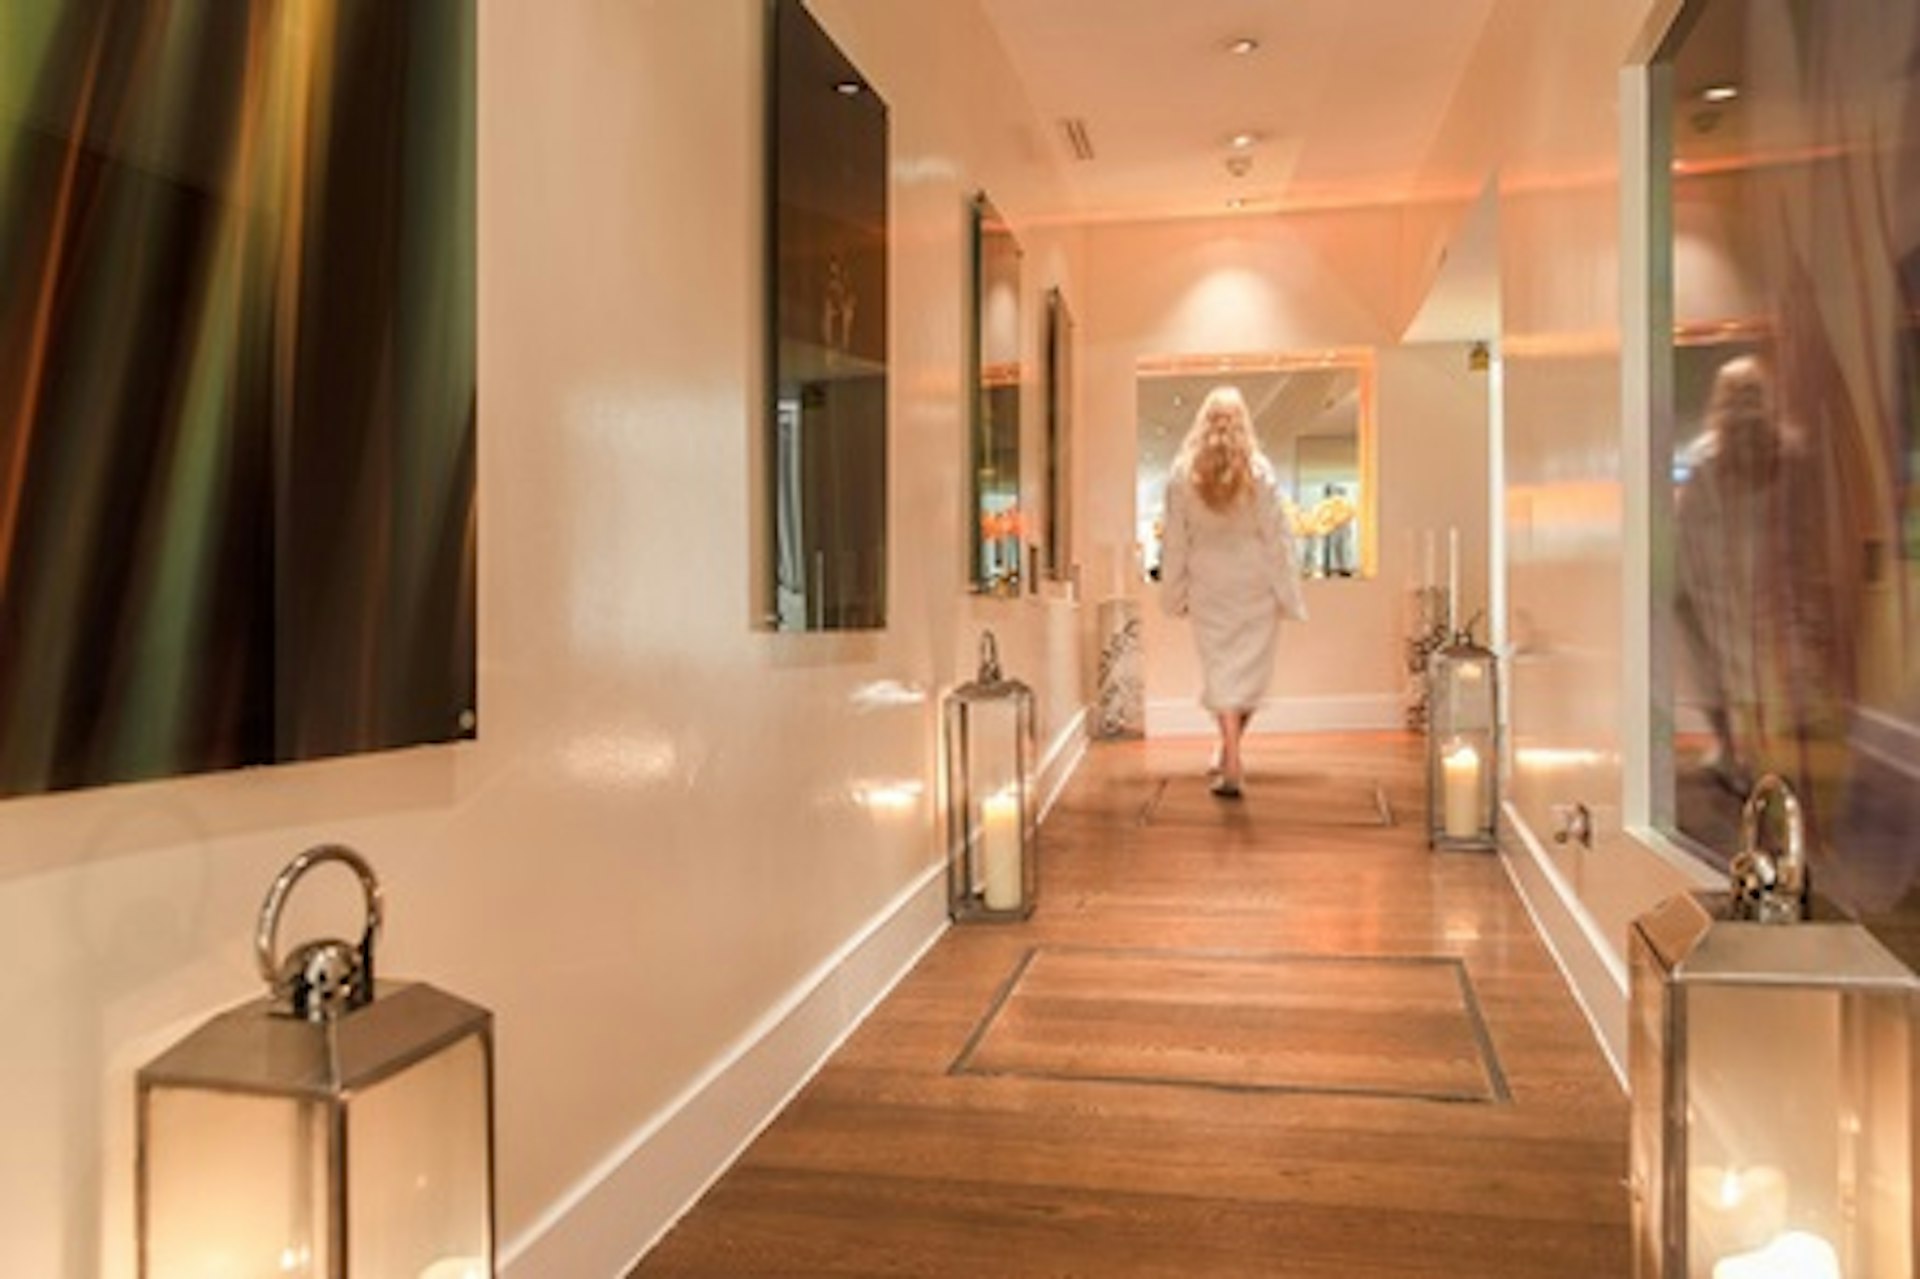 Weekday Spa Relaxation with Treatment and Prosecco at the 5* Montcalm Hotel, London 4